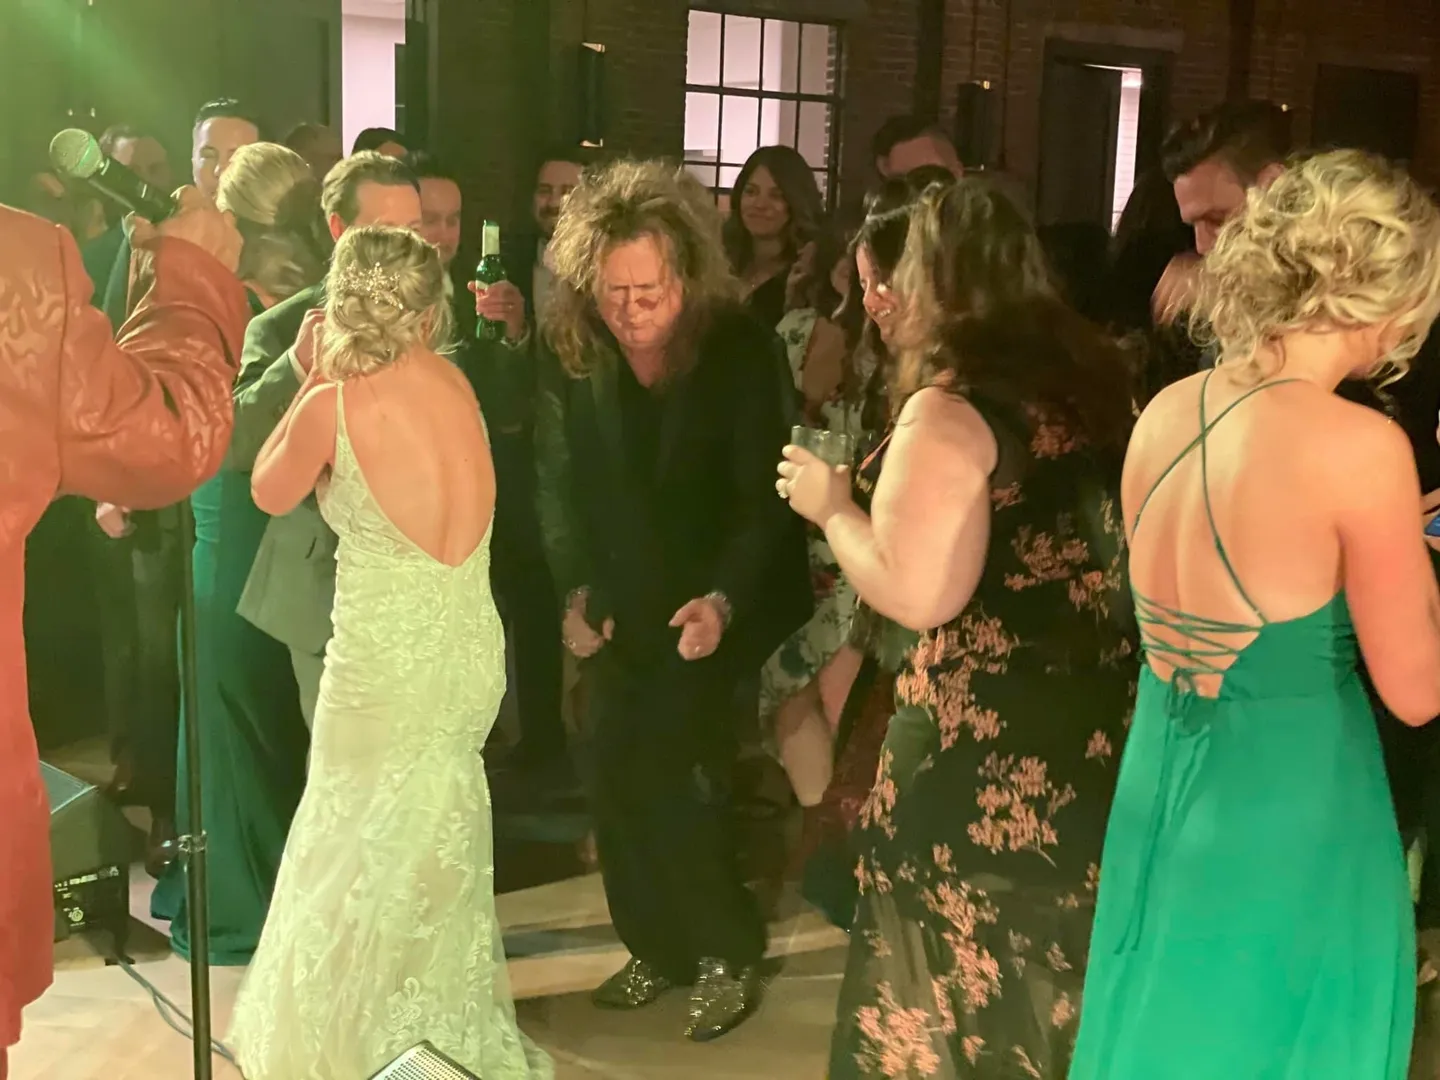 Bunch of people dancing at a wedding